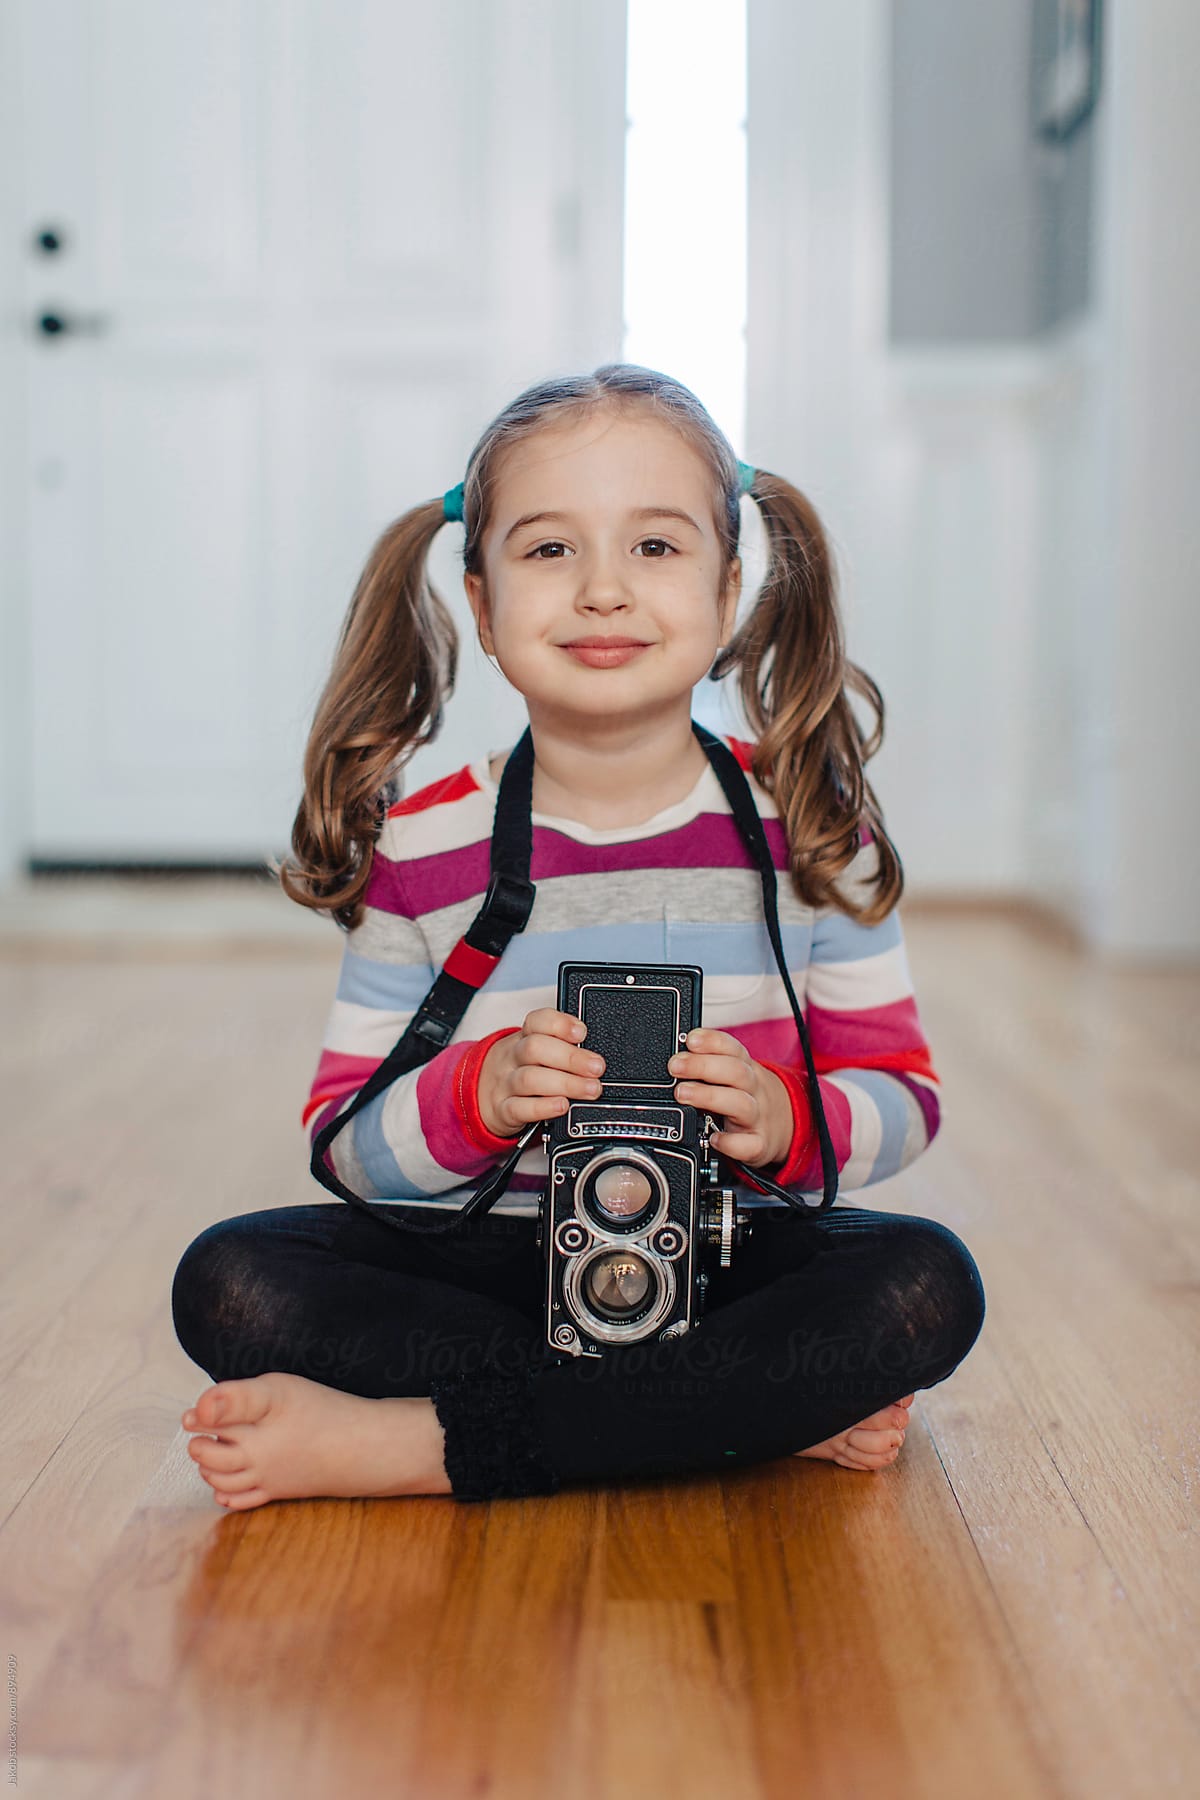 Cute Young Girl With Pigtails Using A Vintage Camera by Jakob ...